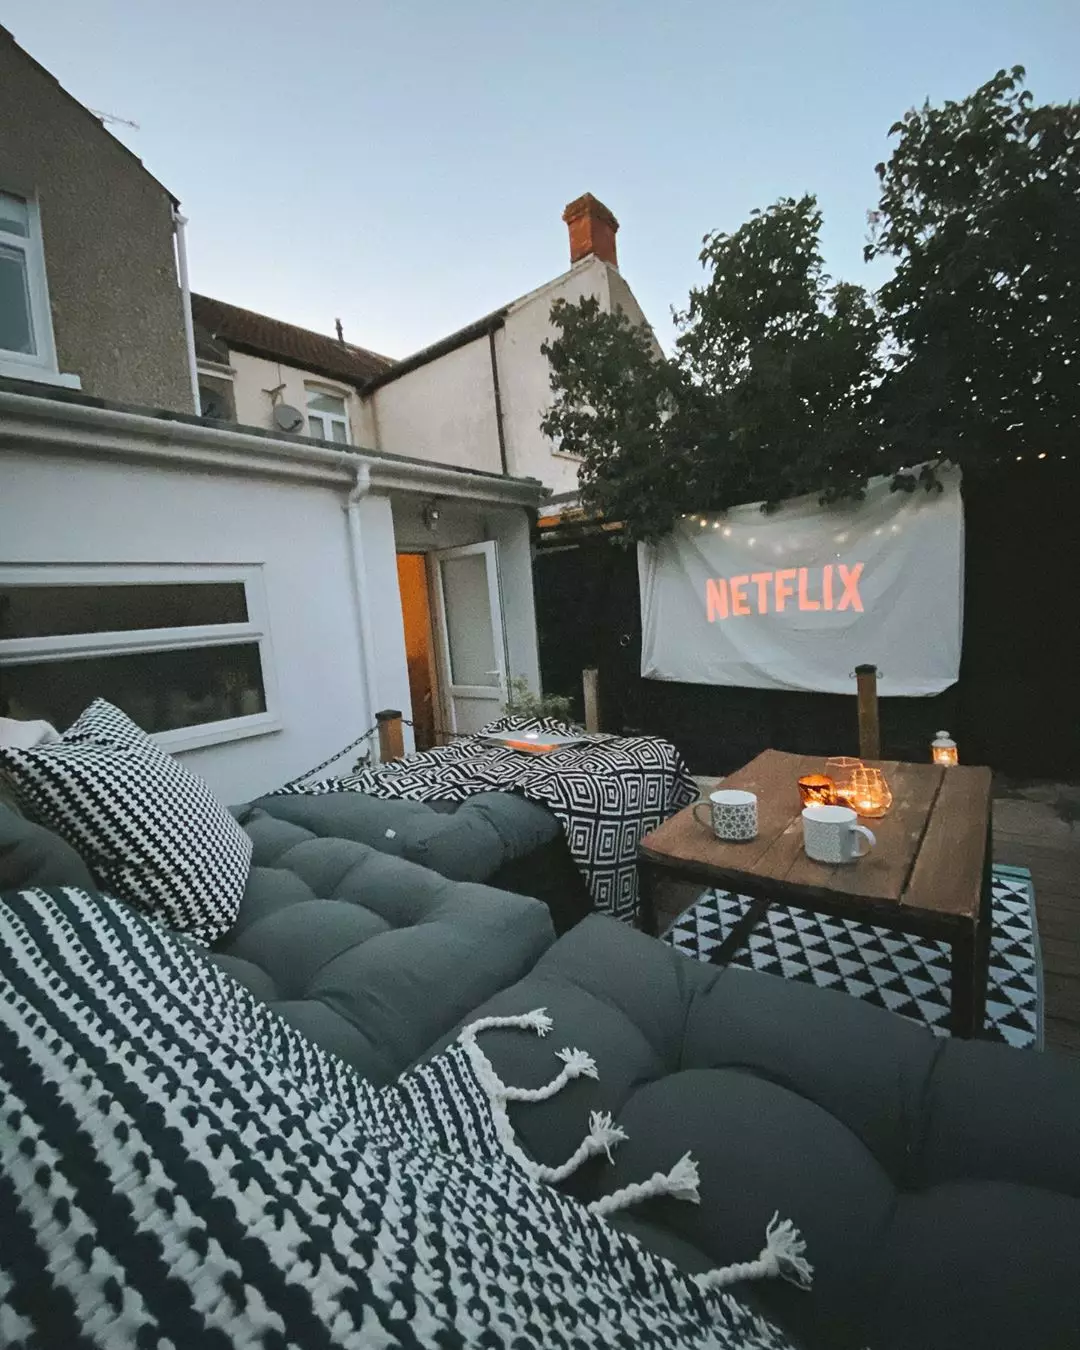 An outdoor cinema with a bed sheet for the screen.